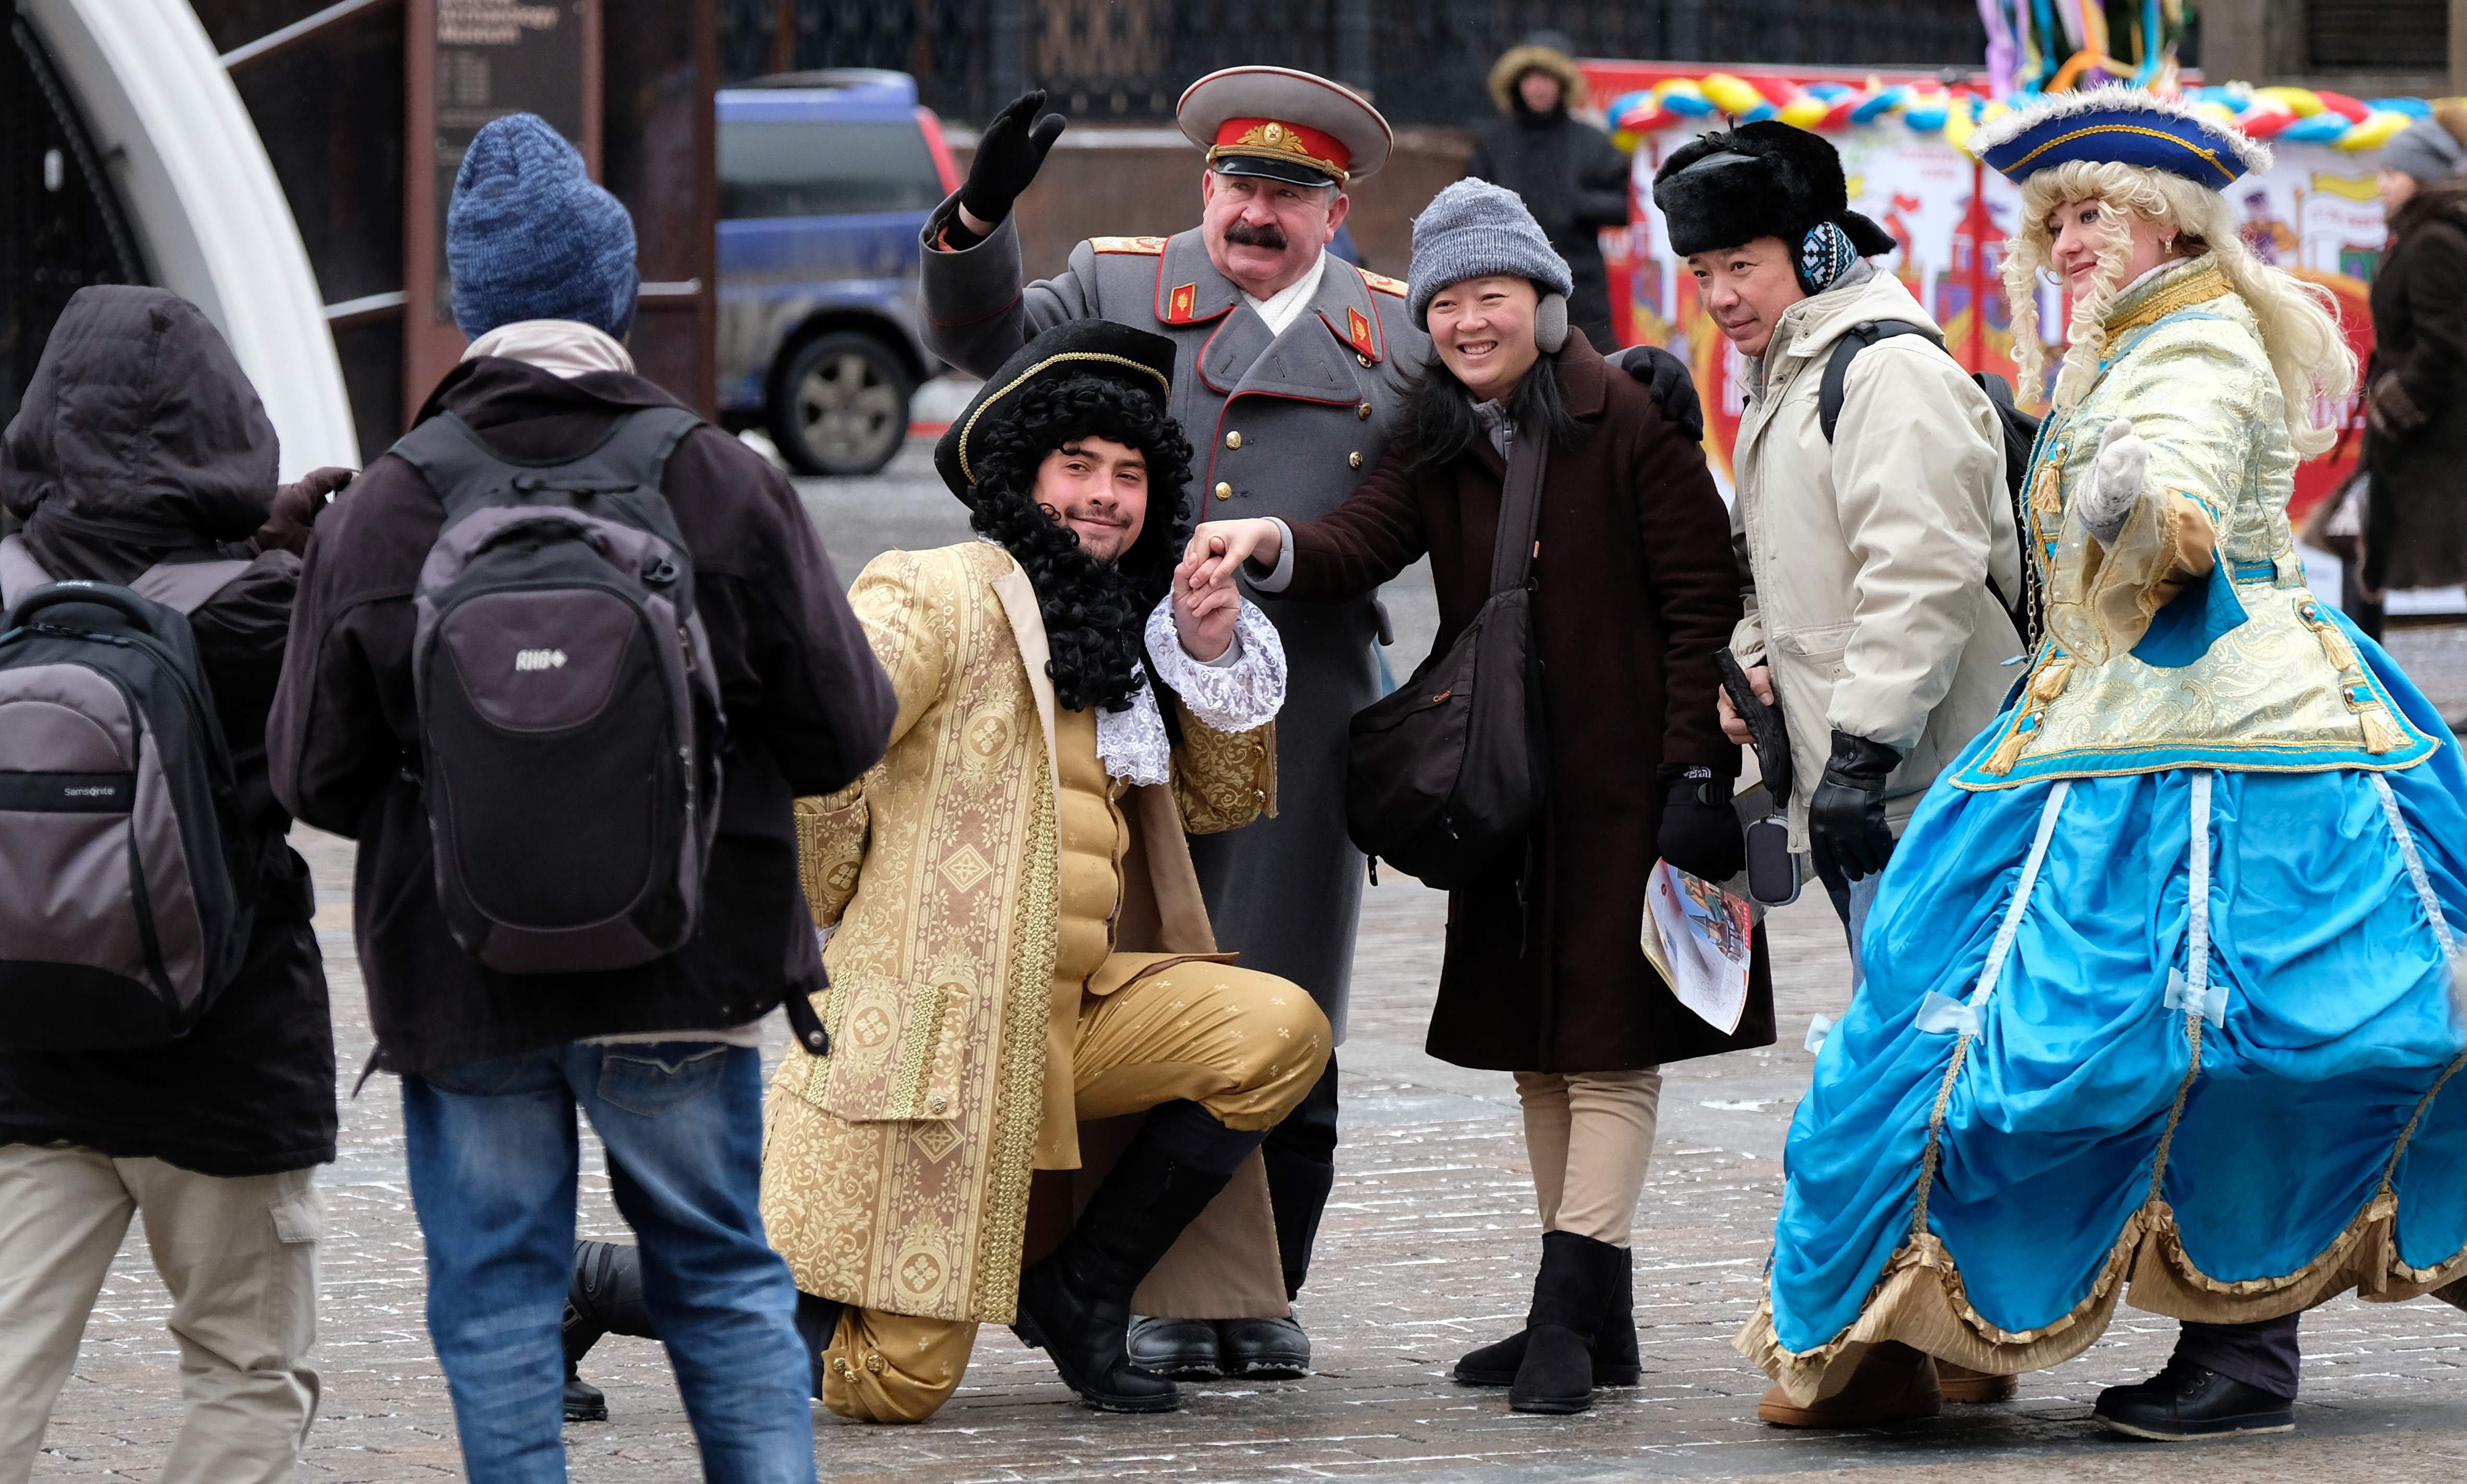 RUSSIA-SHROVETIDE-TOURISM-FEATURE